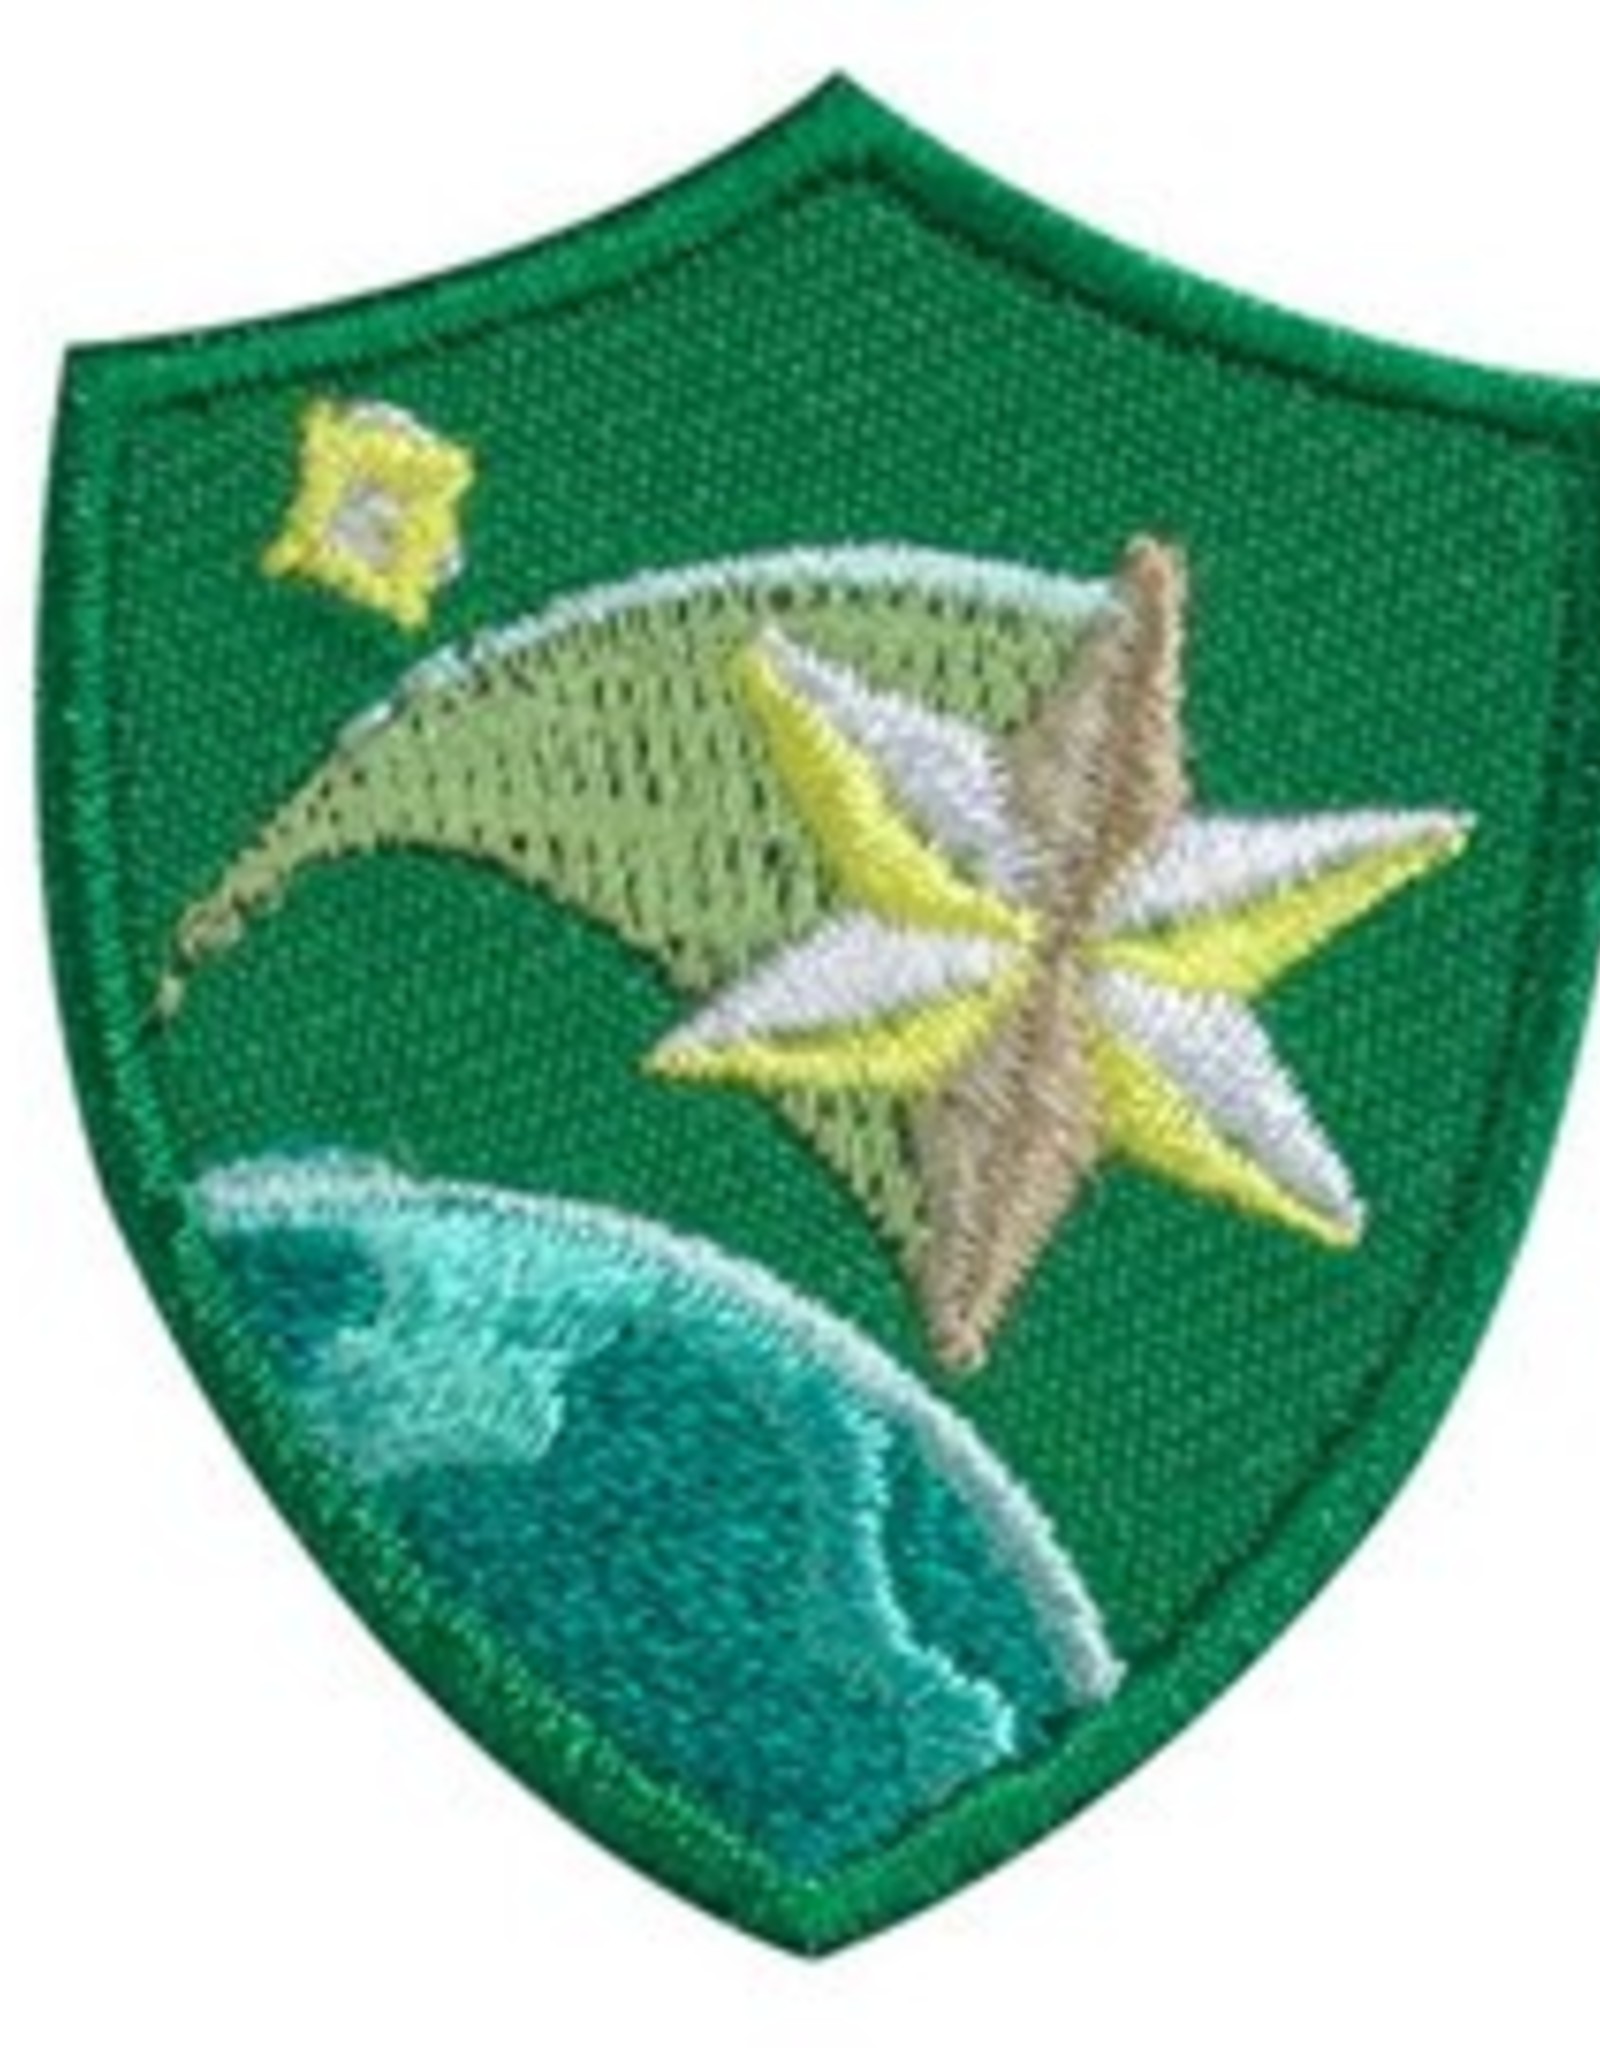 GIRL SCOUTS OF THE USA Shooting Star Troop Crest